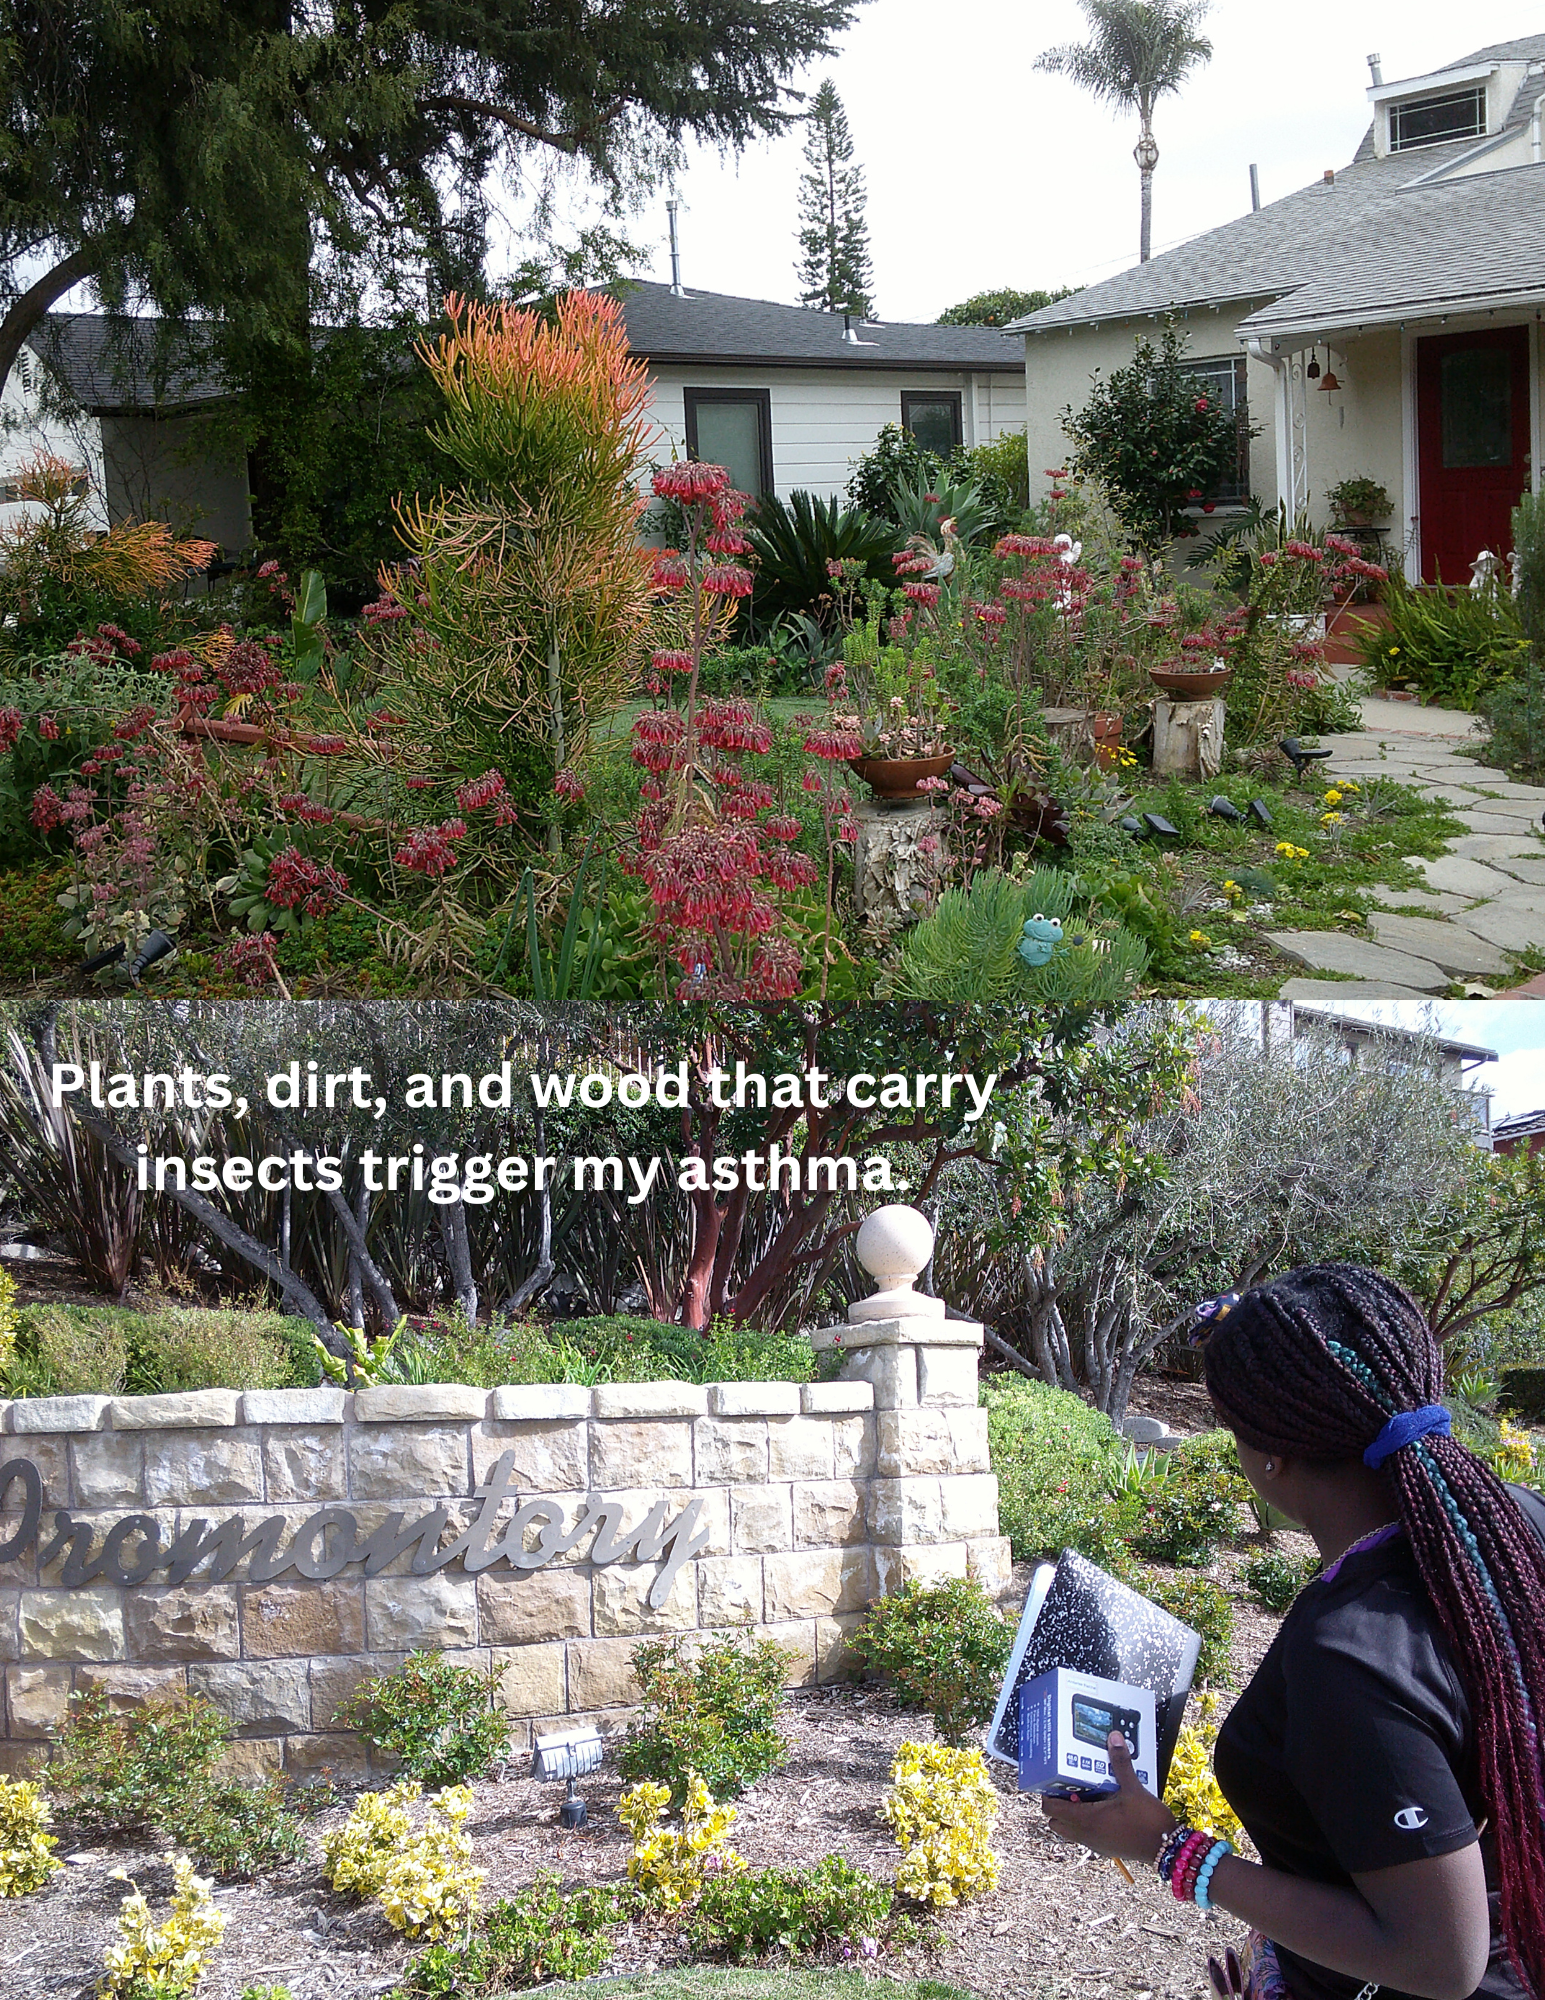 Pictured: A client wearing black is shown on the right side of the screen looking at shrubs, trees and a sign that says Promontory. They are holding a notebook. Text on the screen says, “Plants, dirt and wood that carry insects trigger my asthma.”